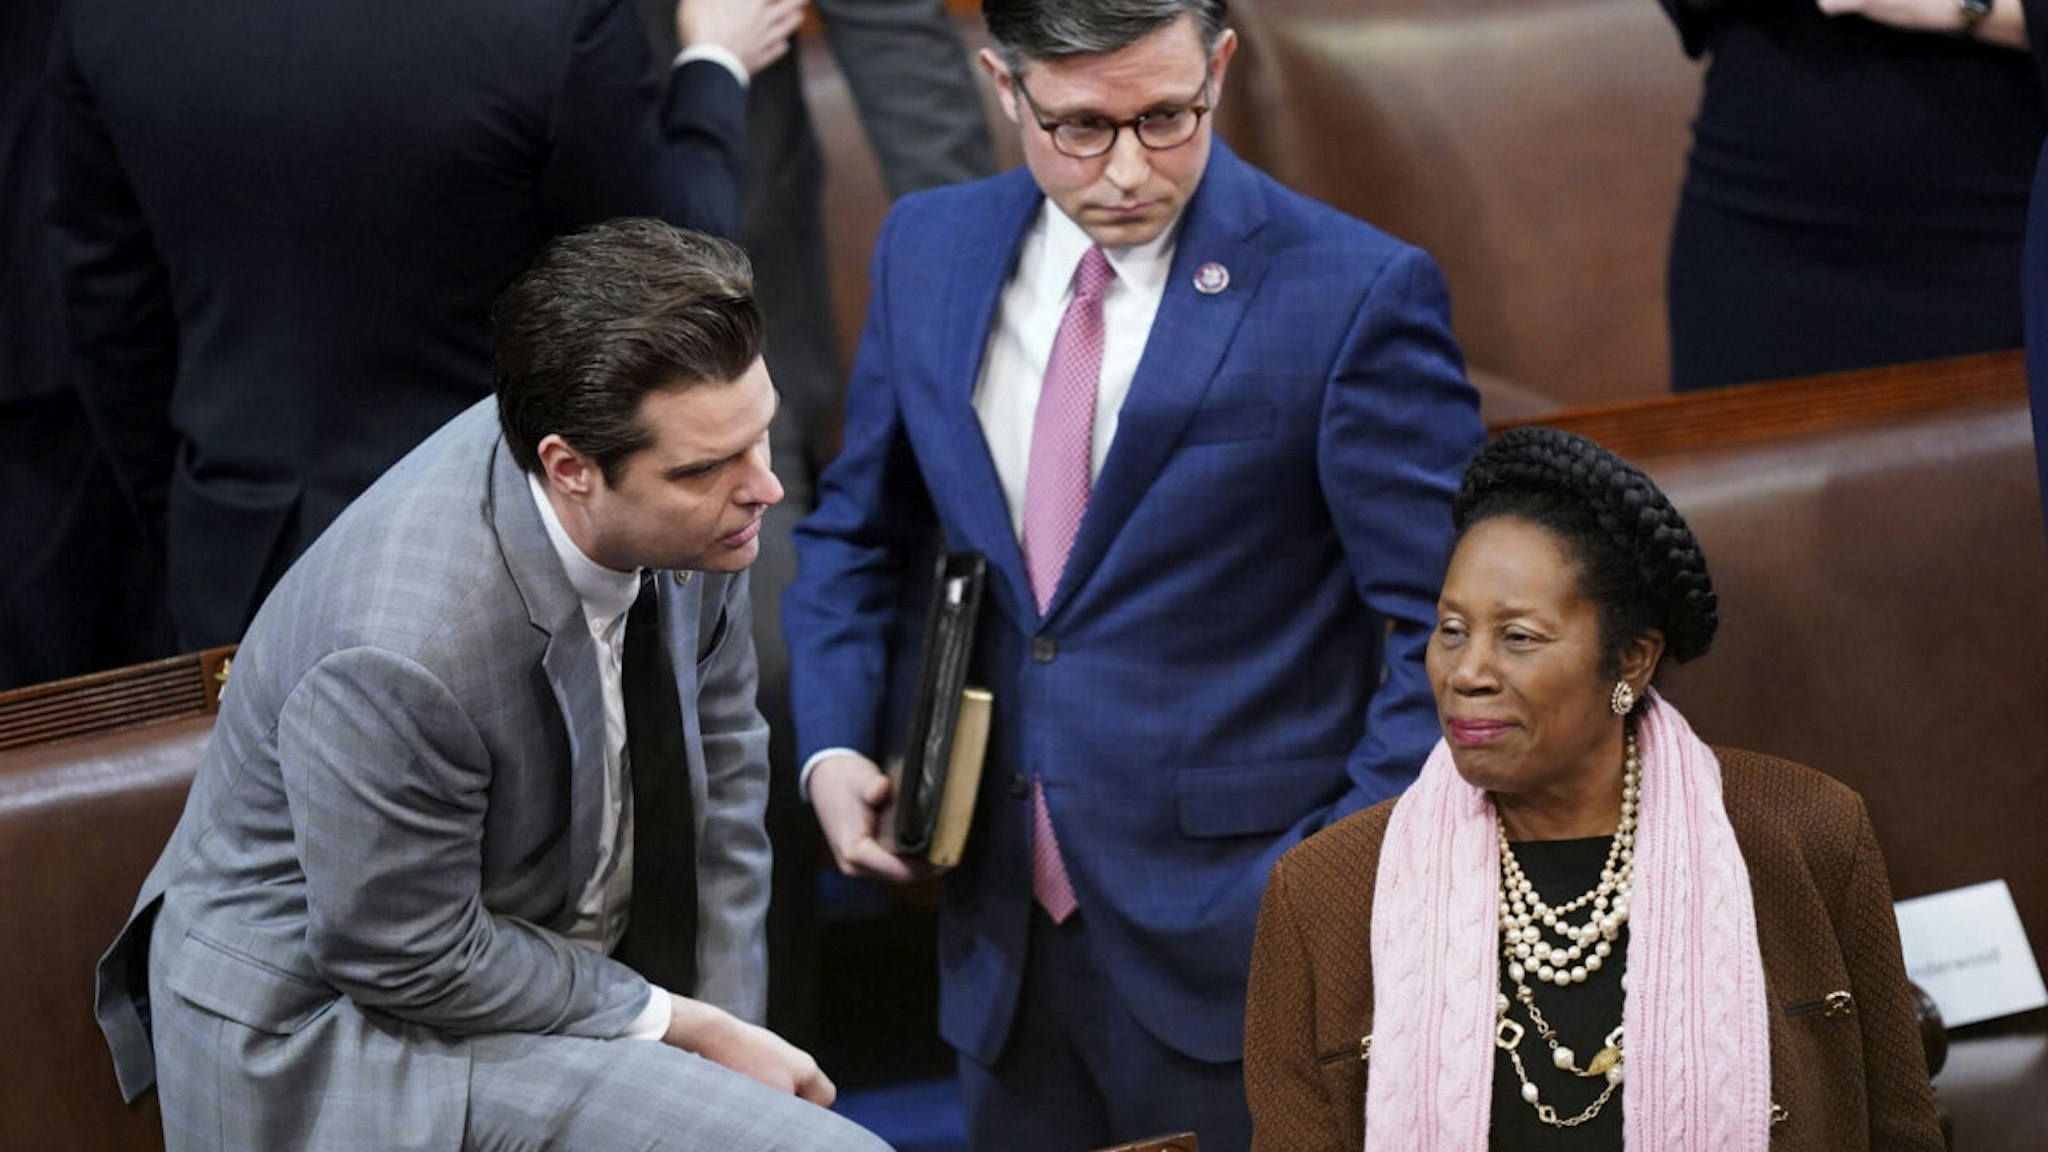 Democrat Sheila Jackson Lee of Texas talks with Republican Matt Gaetz of Florida during a meeting of the 118th Congress, Friday, January 6, 2023, at the U.S. Capitol in Washington DC.